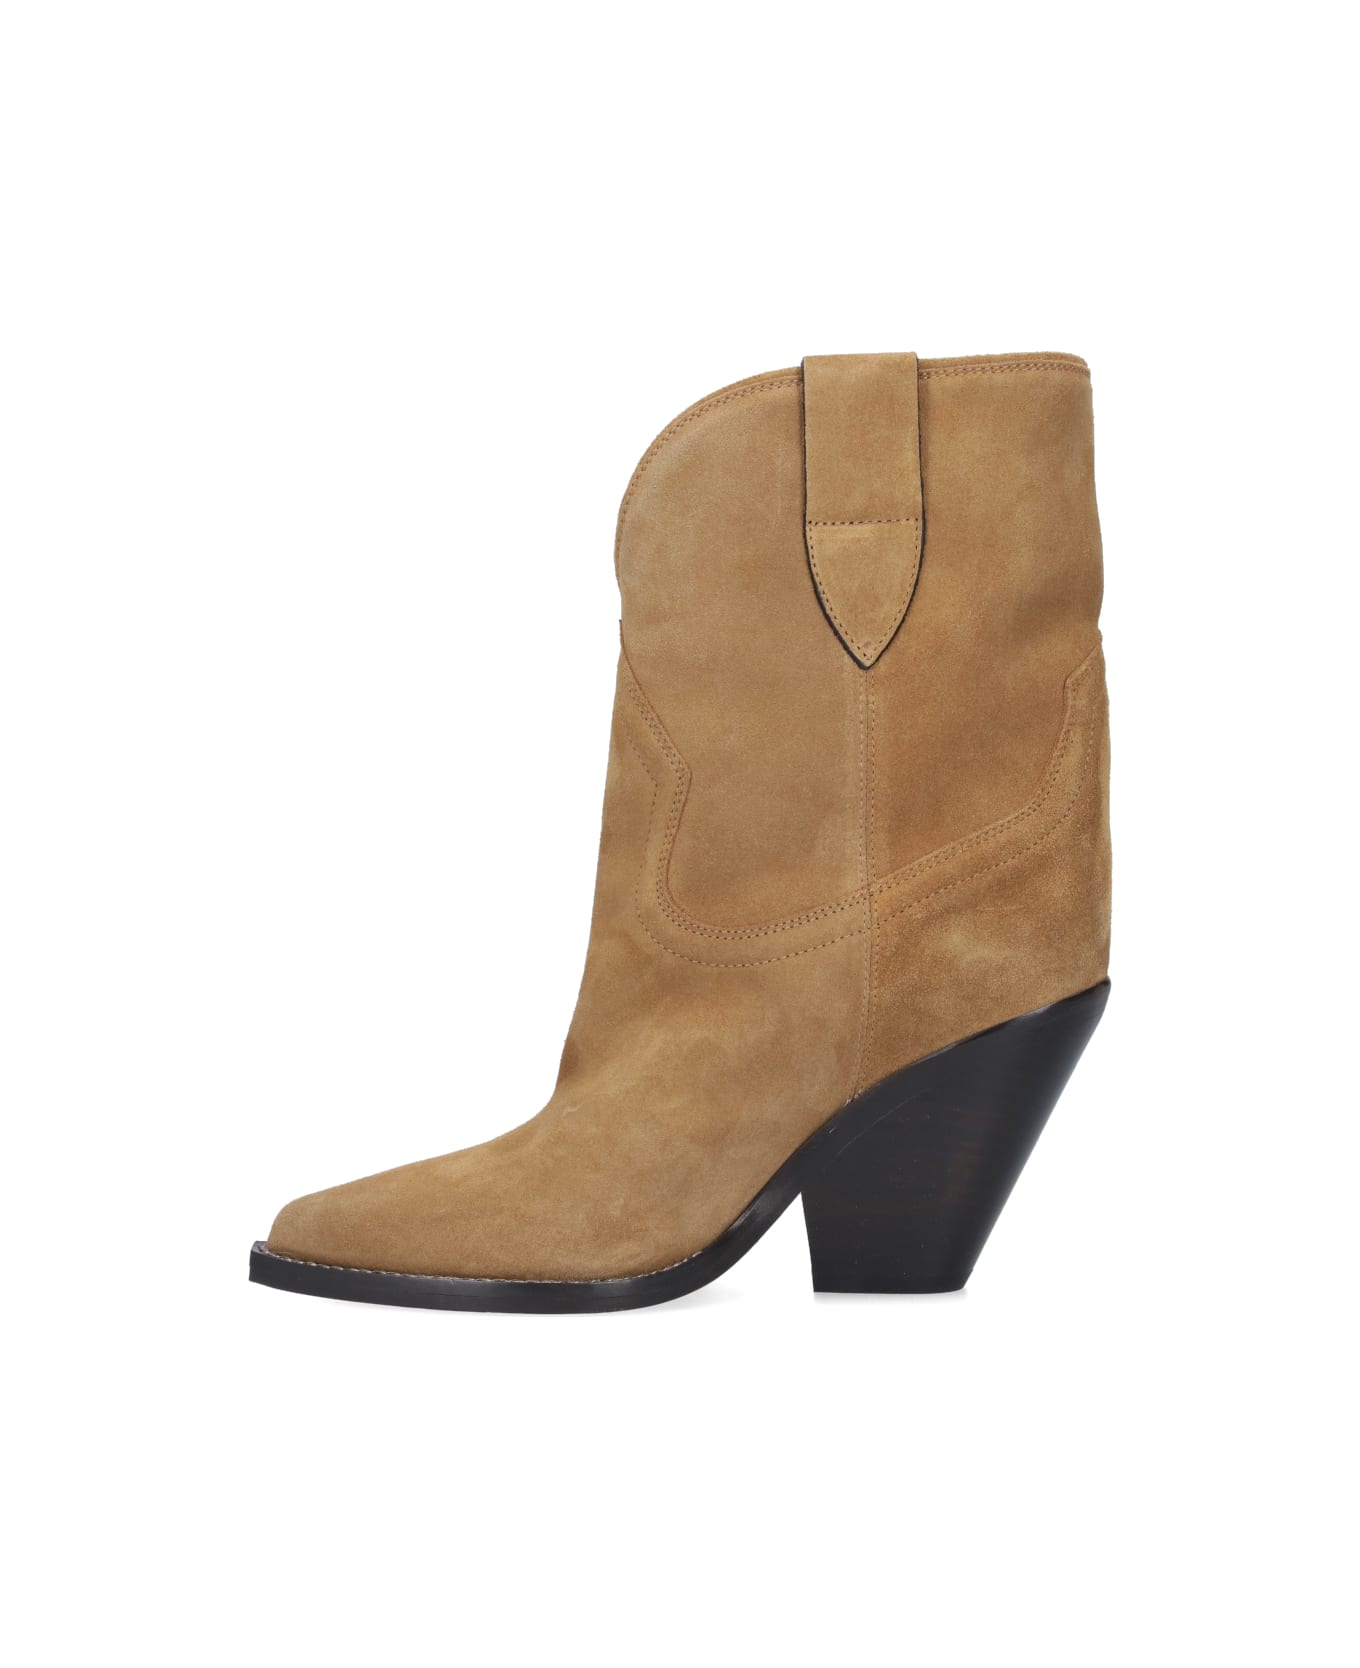 Isabel Marant 'dahope' Texan Boots - Taupe ブーツ